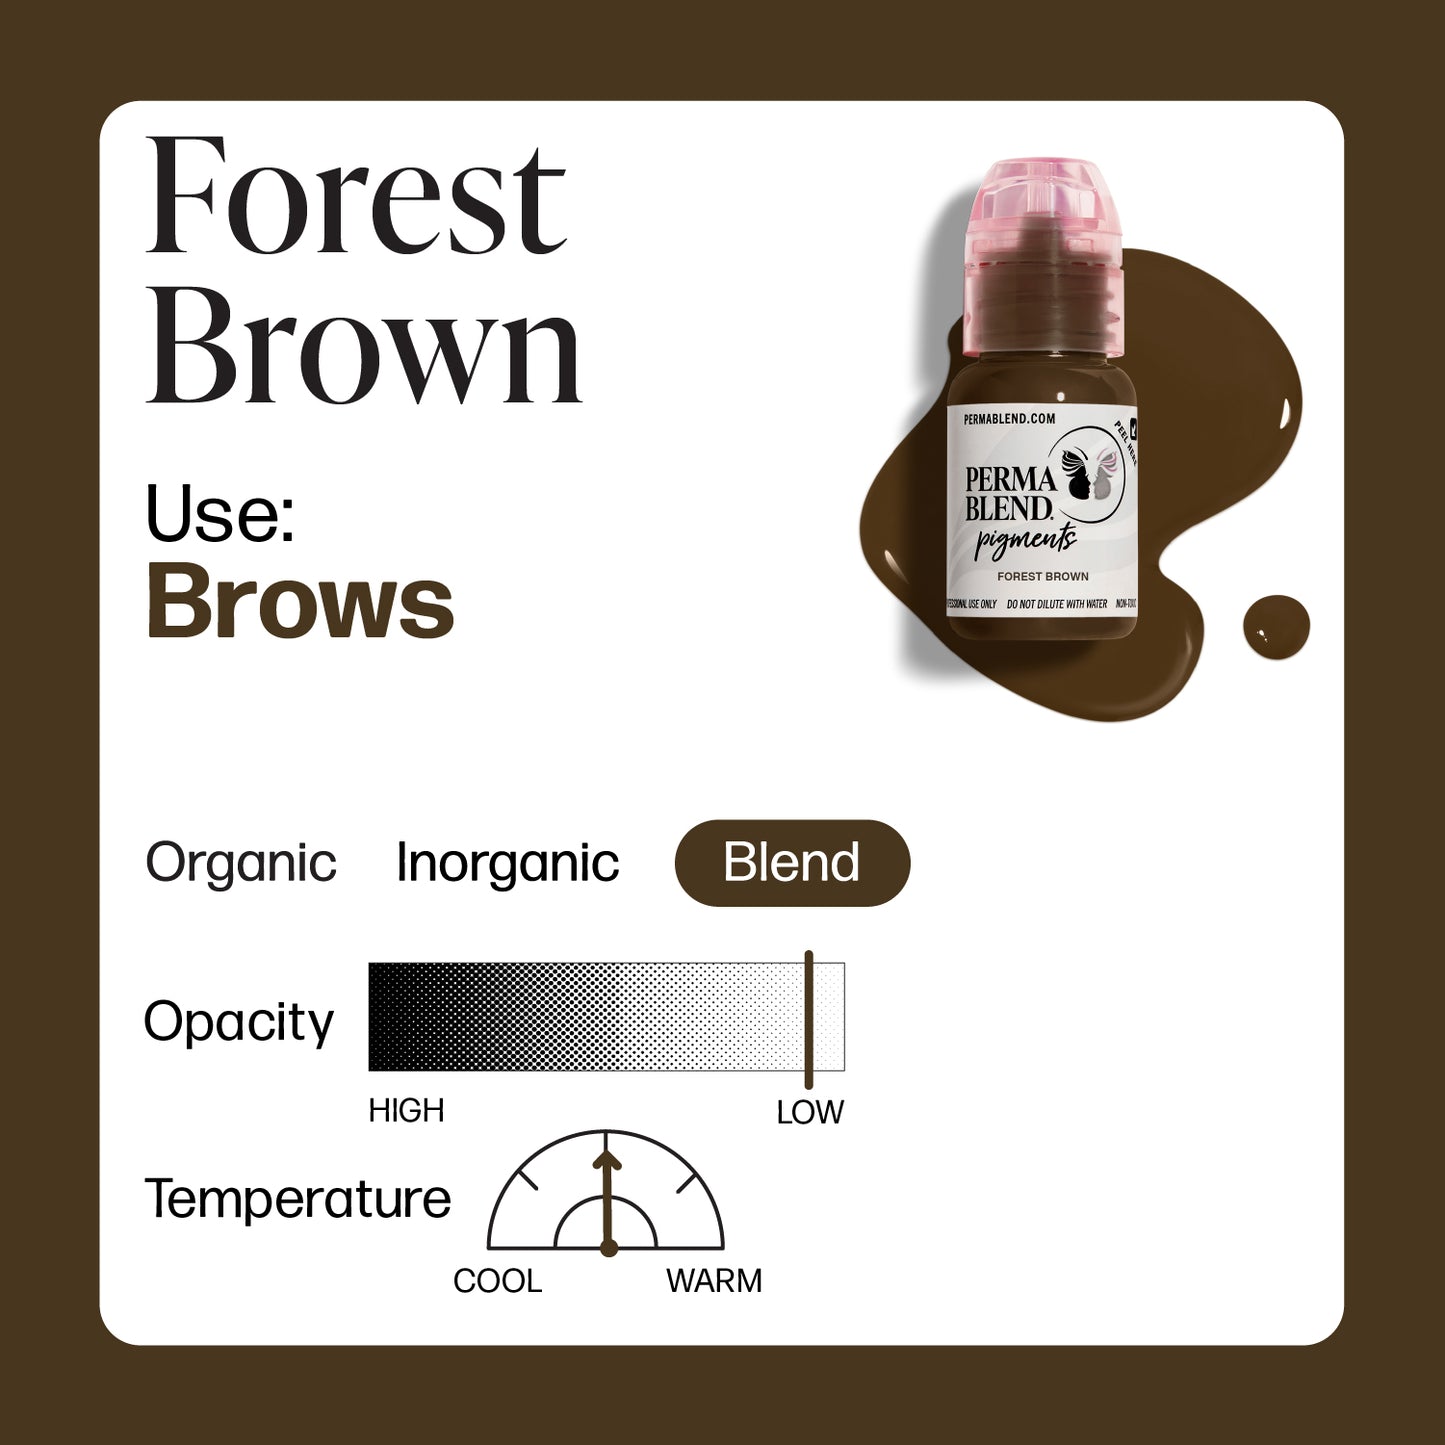 Forest Brown